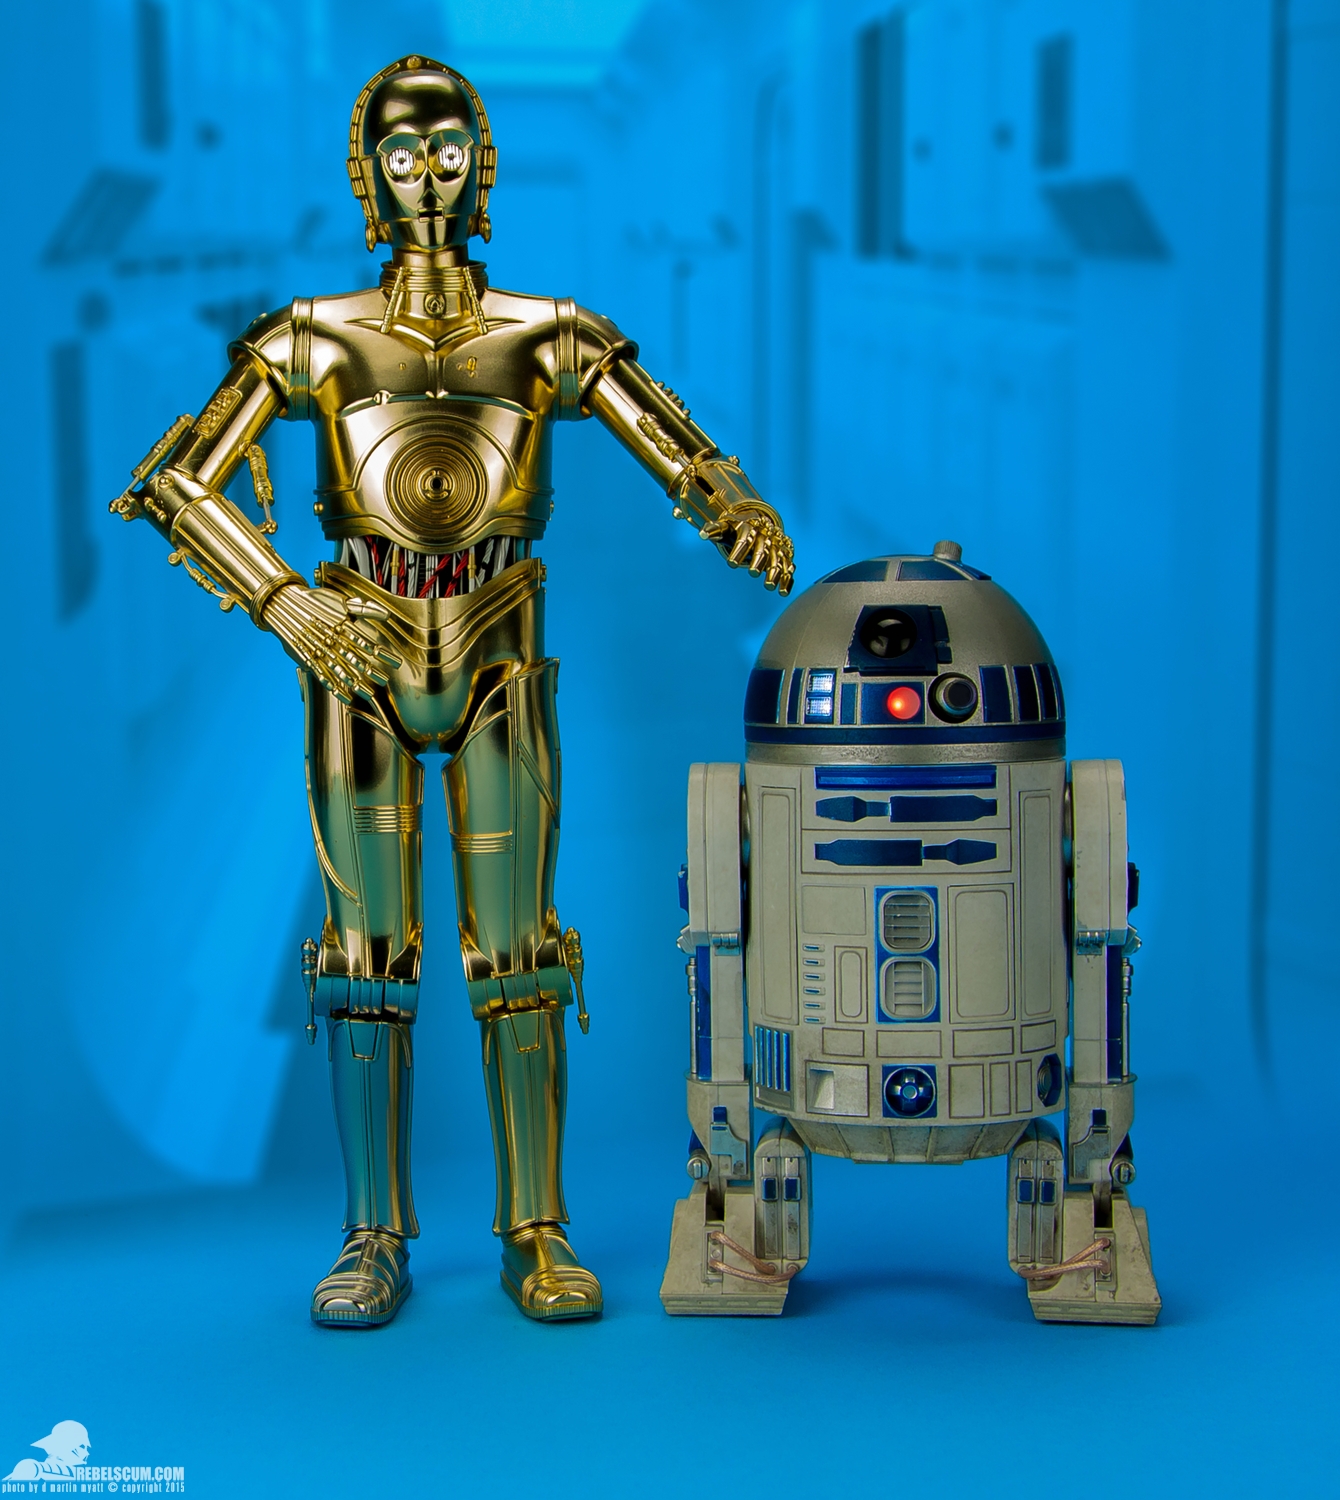 Sideshow-Collectibles-R2-D2-Sixth-Scale-Figure-Review-054.jpg